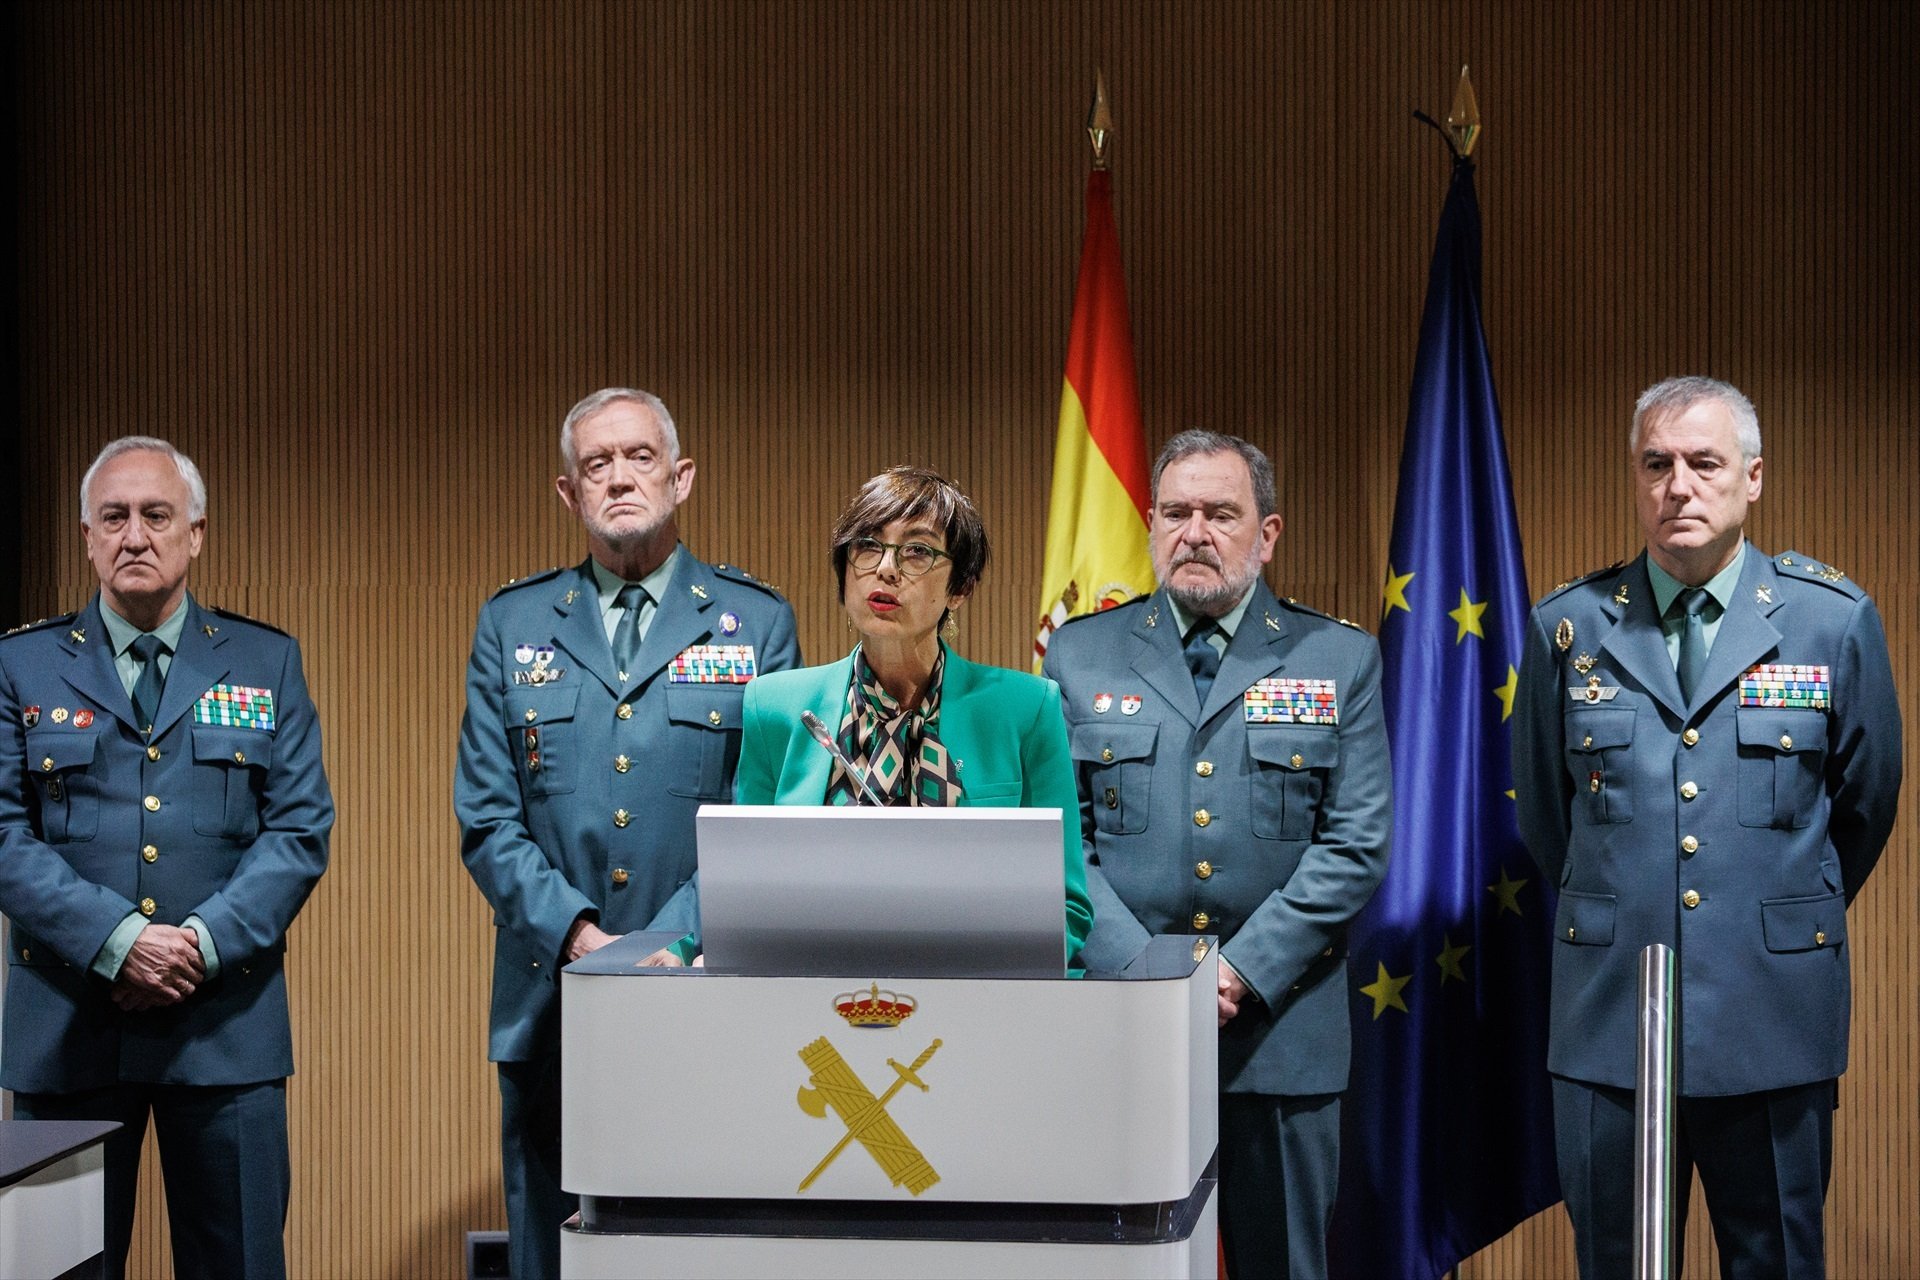 Head of Spain's Civil Guard resigns after husband is indicted over corruption case